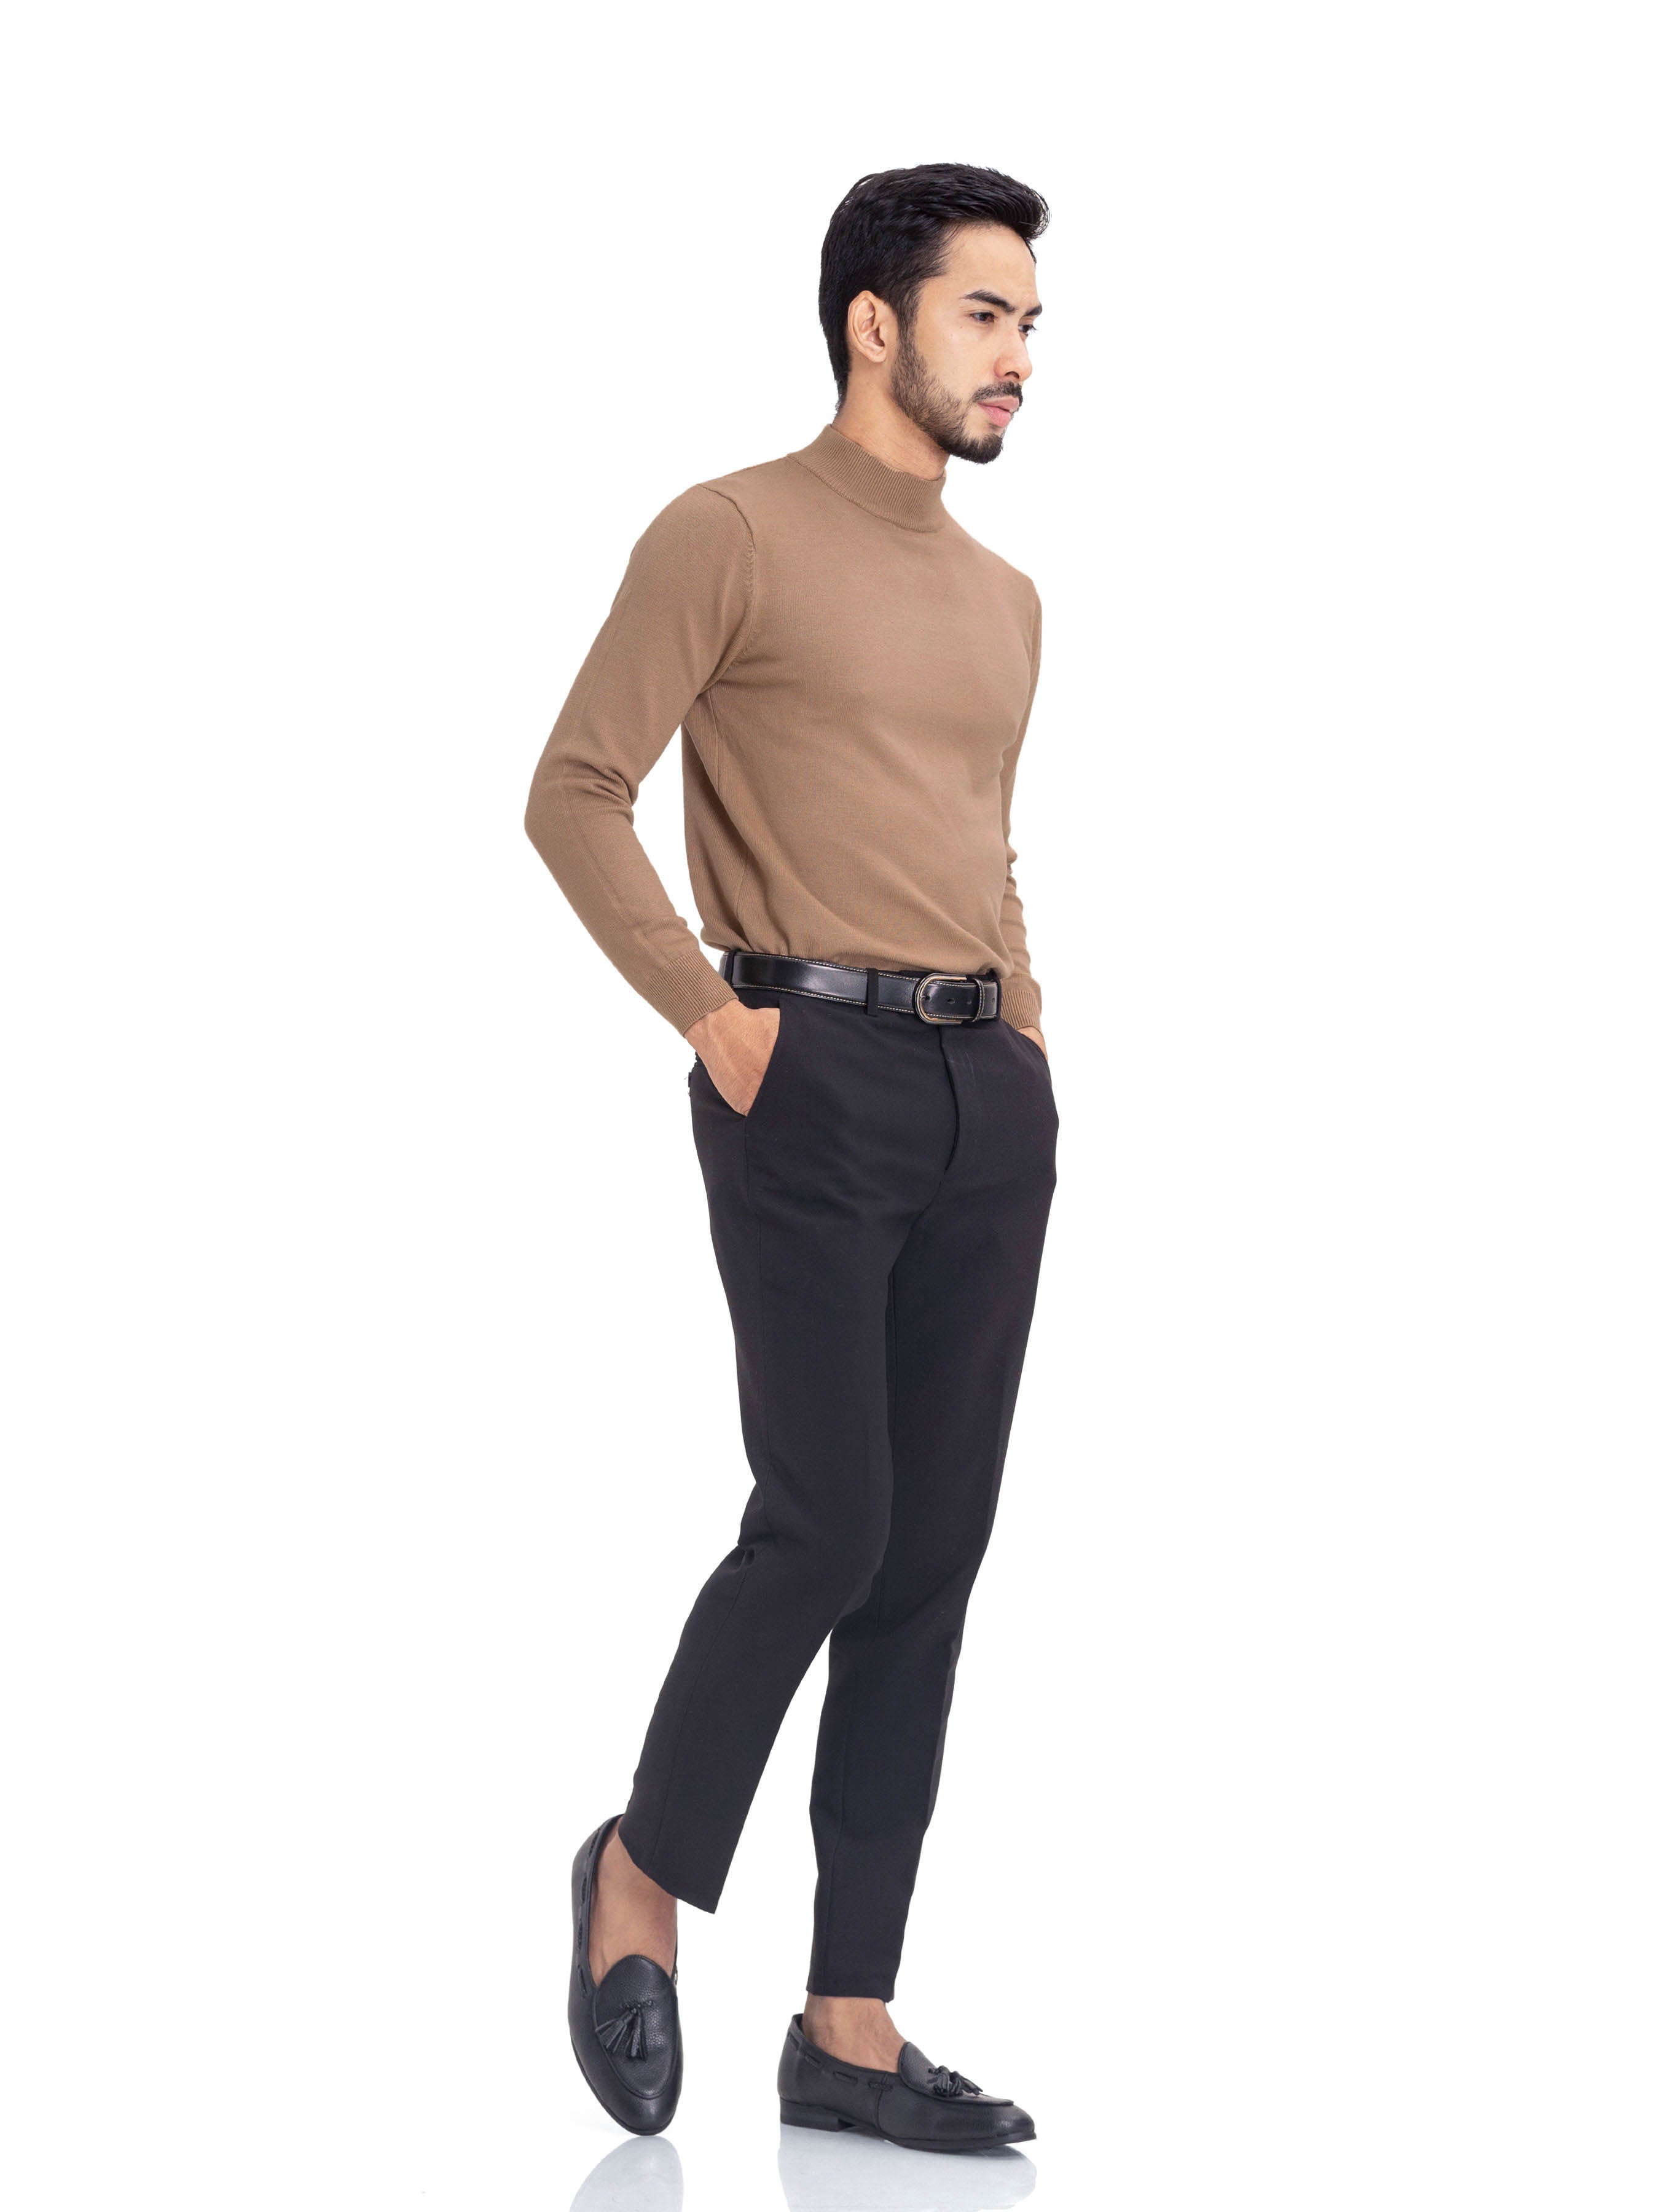 Turtleneck Cashmere Sweater - Brown - Zeve Shoes